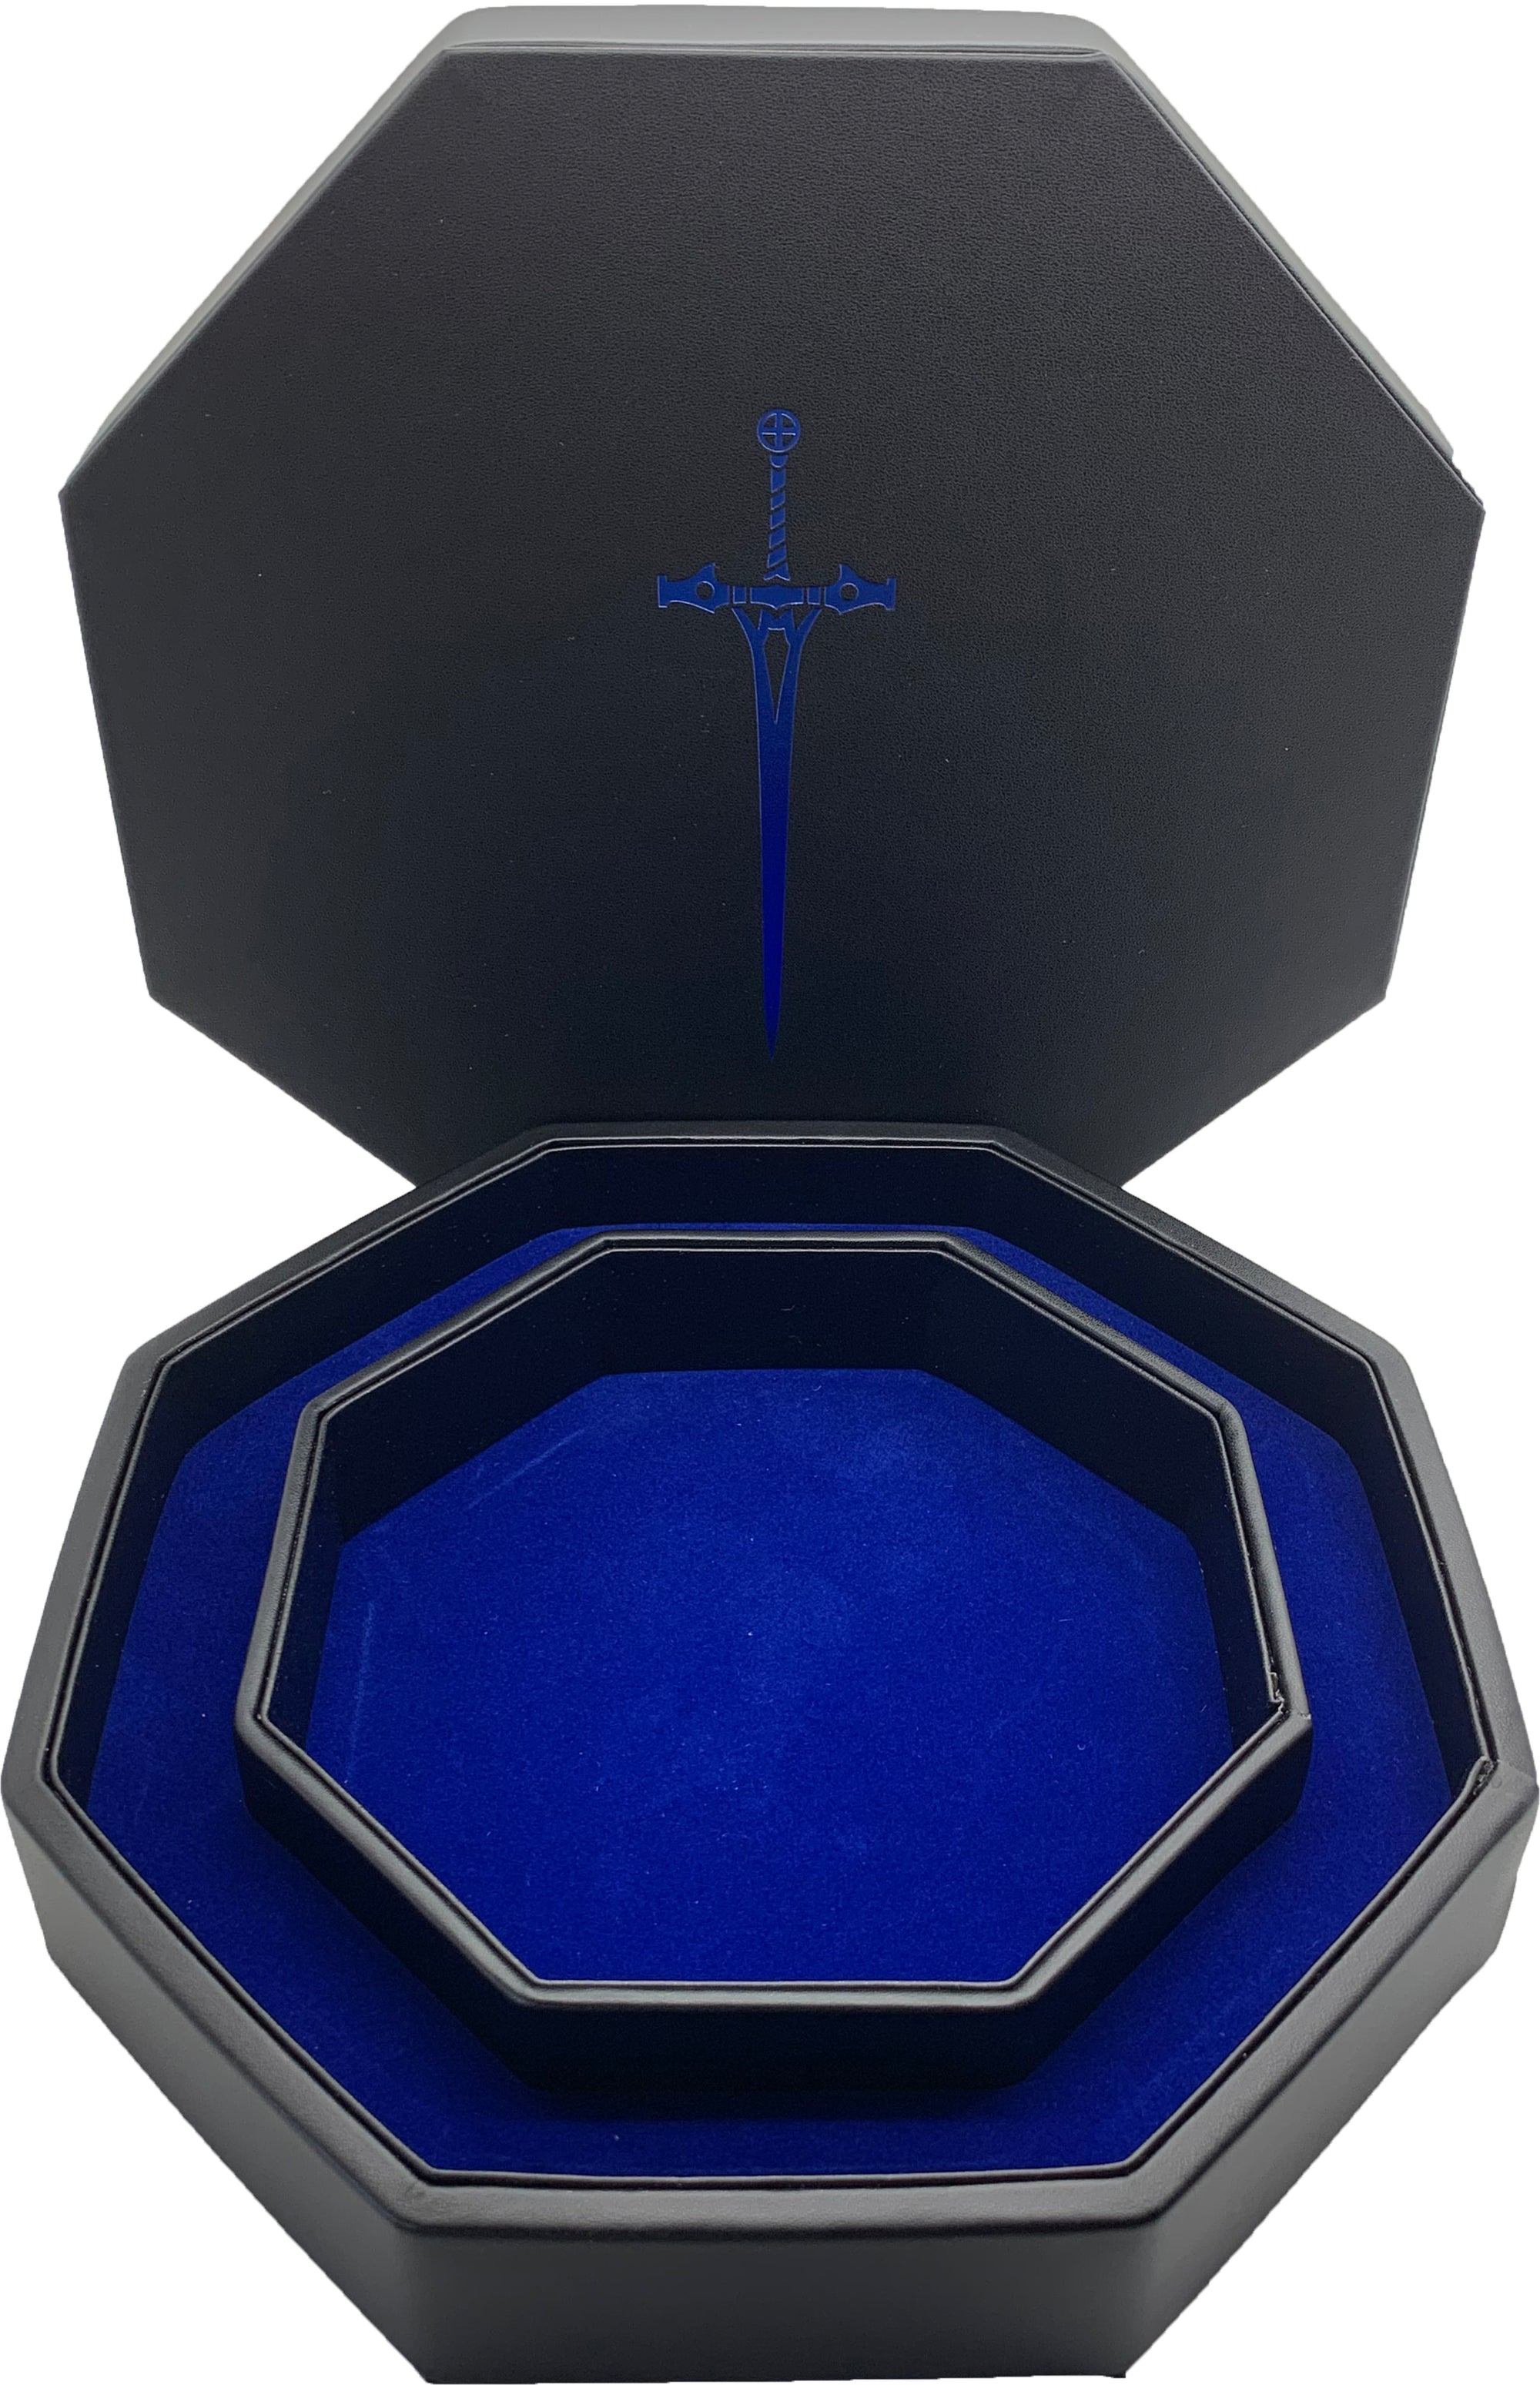 Blue Sword - Tray of Holding™ Dice Tray by Norse Foundry